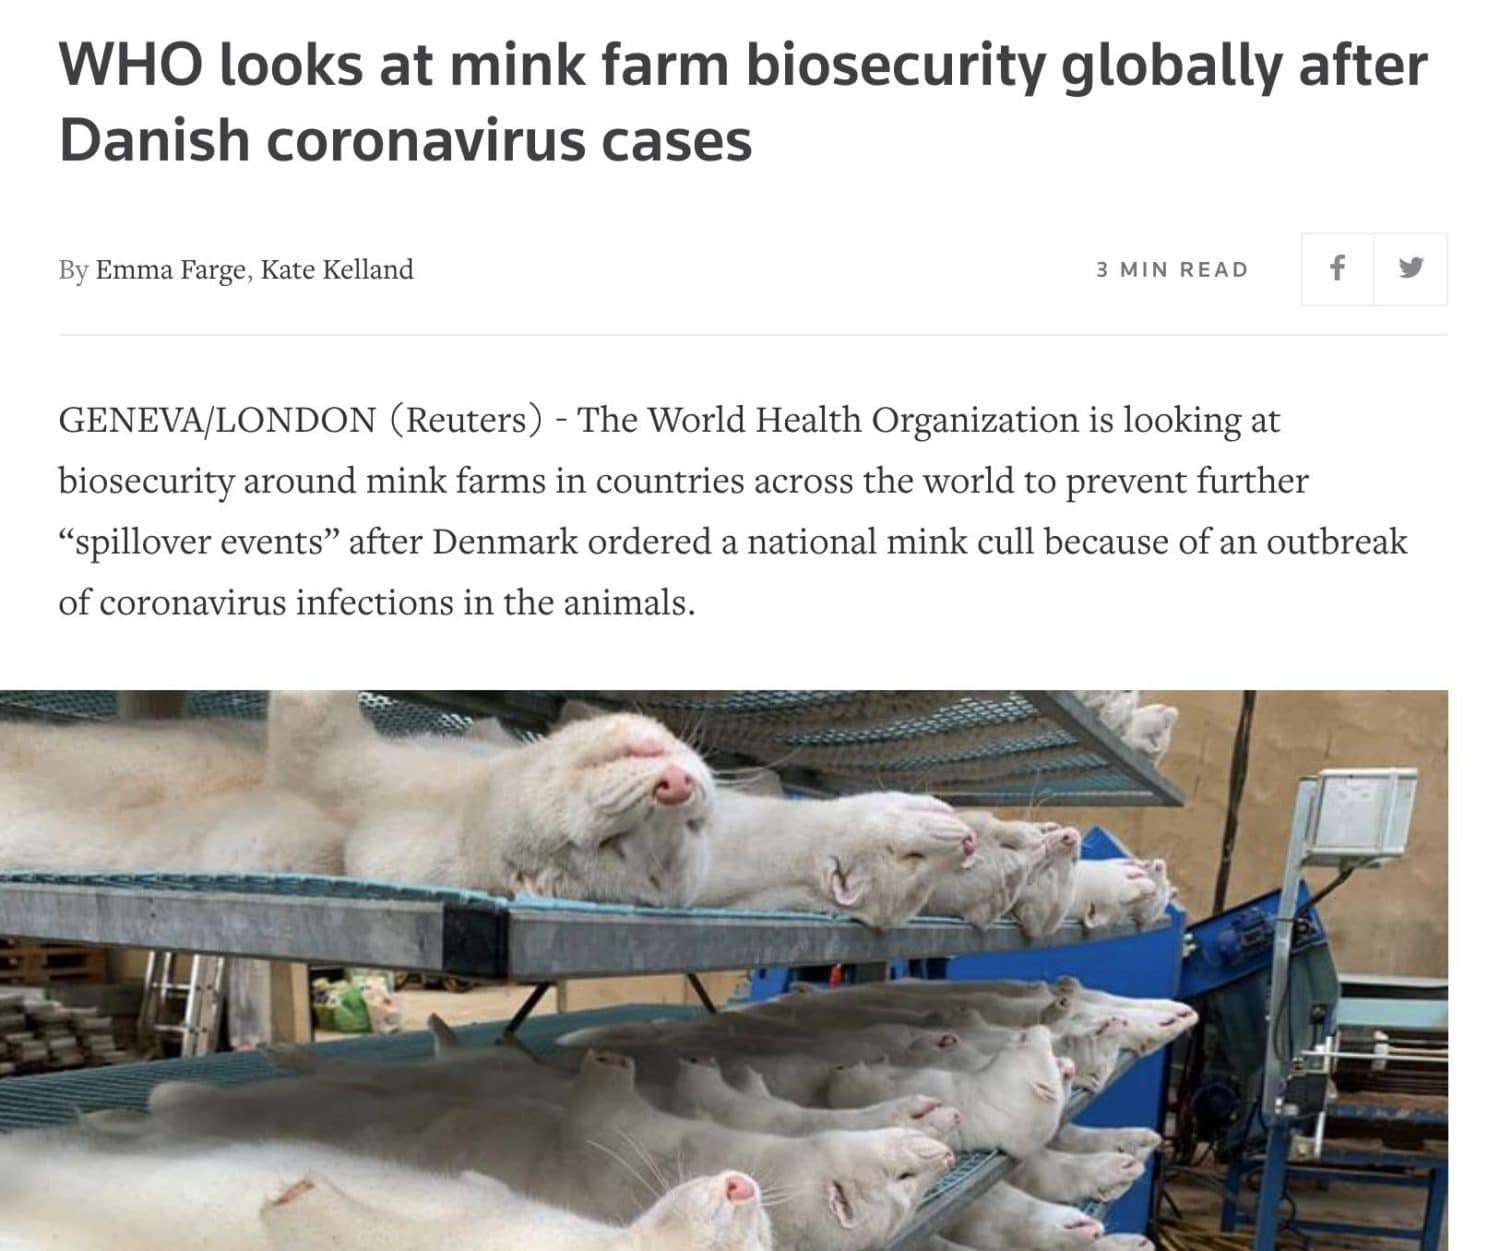 Instead of calling for the end of the mink trade, the WHO talks about biosecurity.